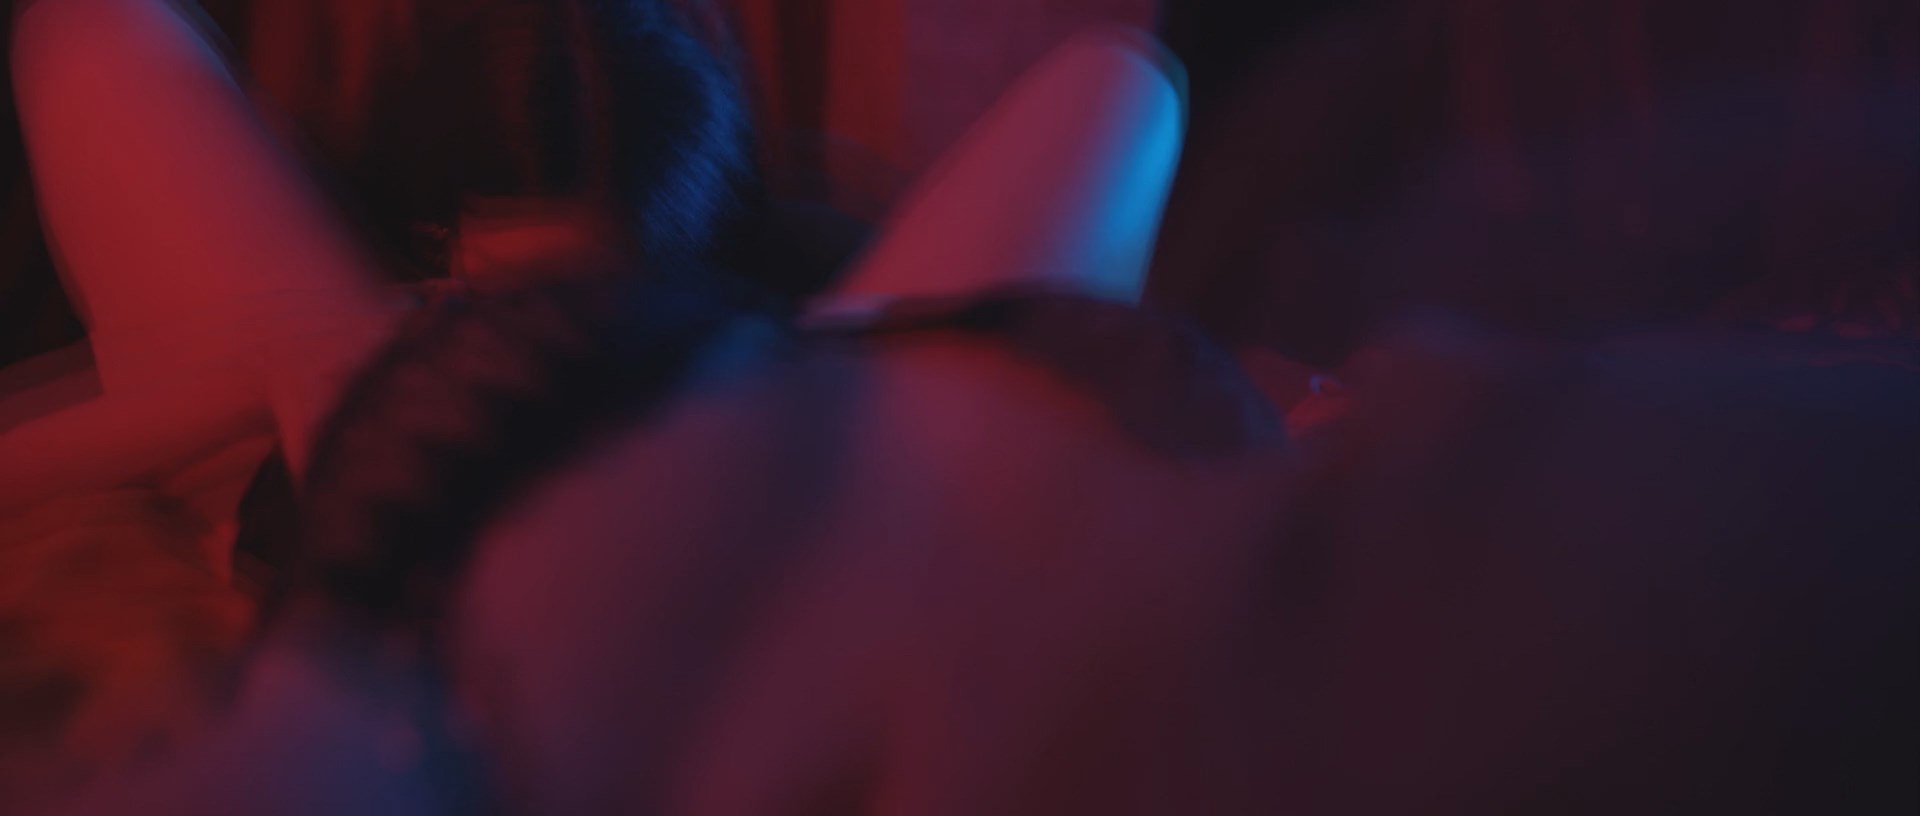 Natalie Martins and Jessica Alonso has lesbian sex scene. 